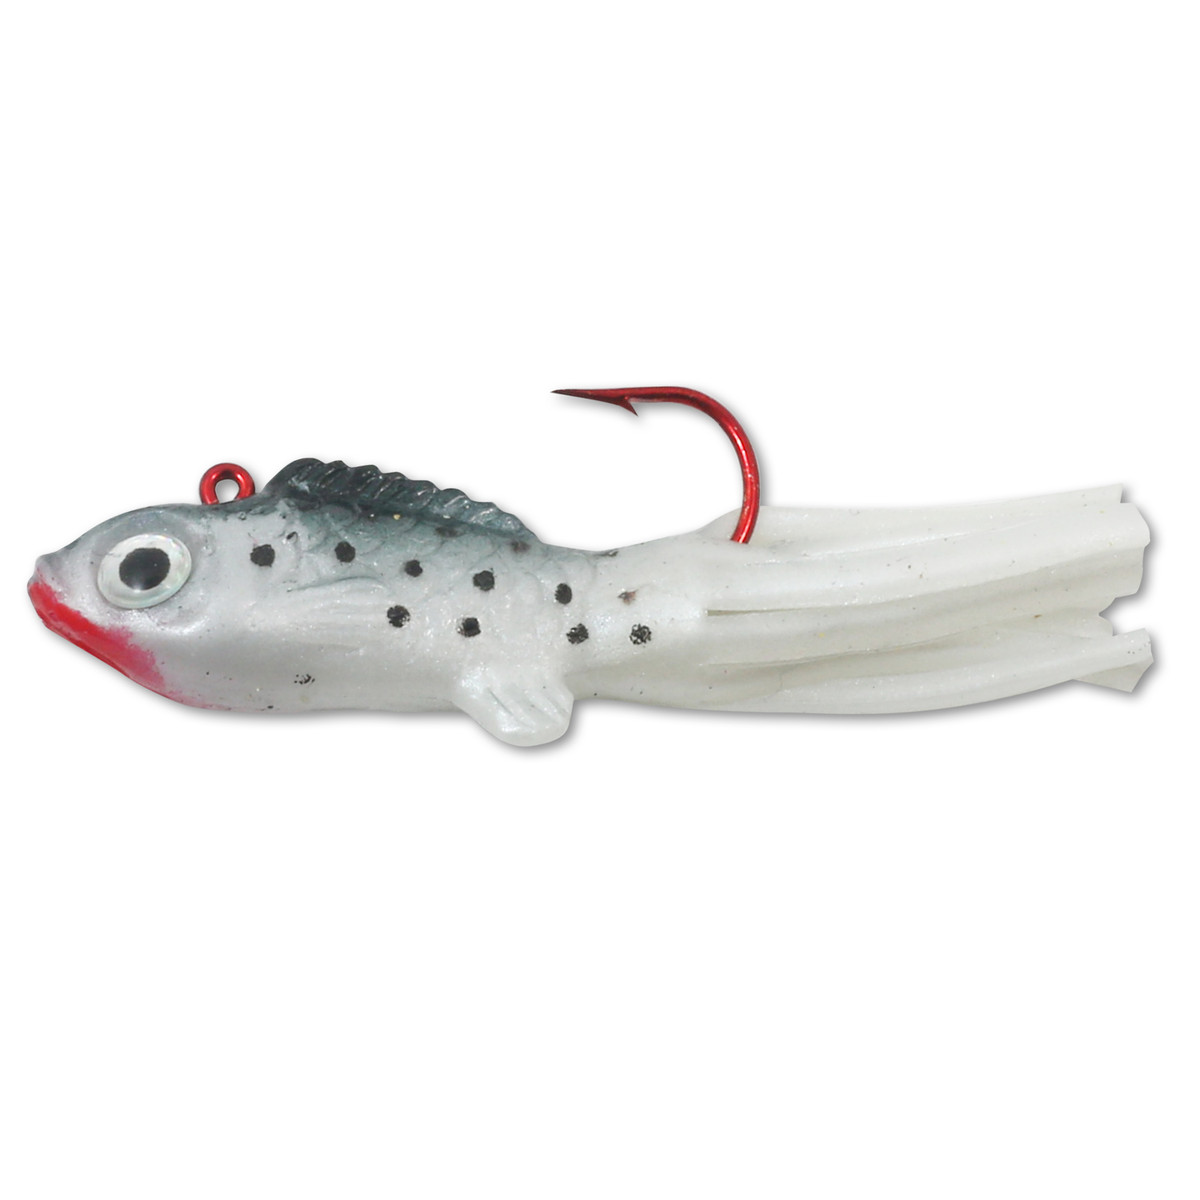 Pack of 1 Soft Lure Bait Fishing Tackle Perch Jig